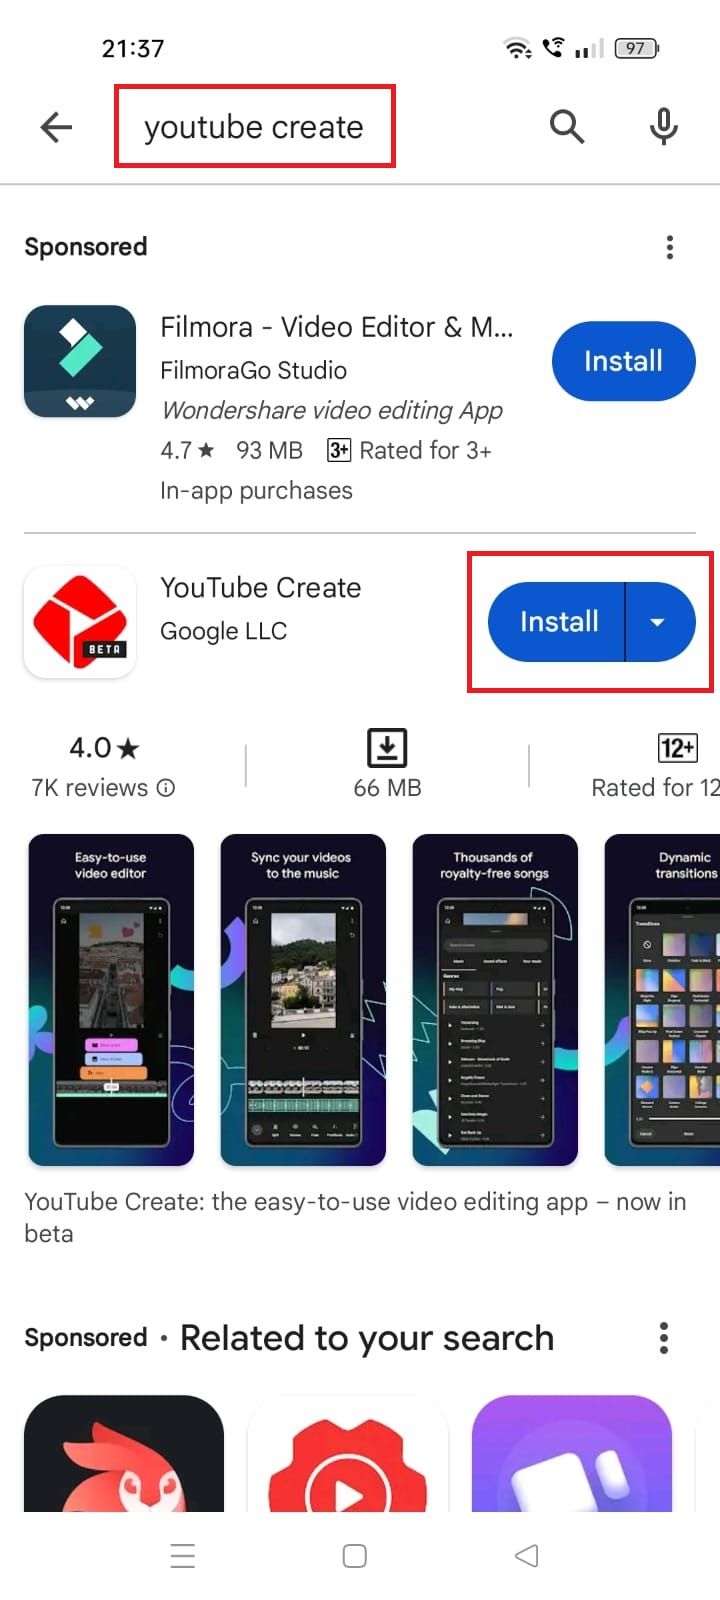 Screenshot highlighting the Install option for YouTube Create in the Google Play Store